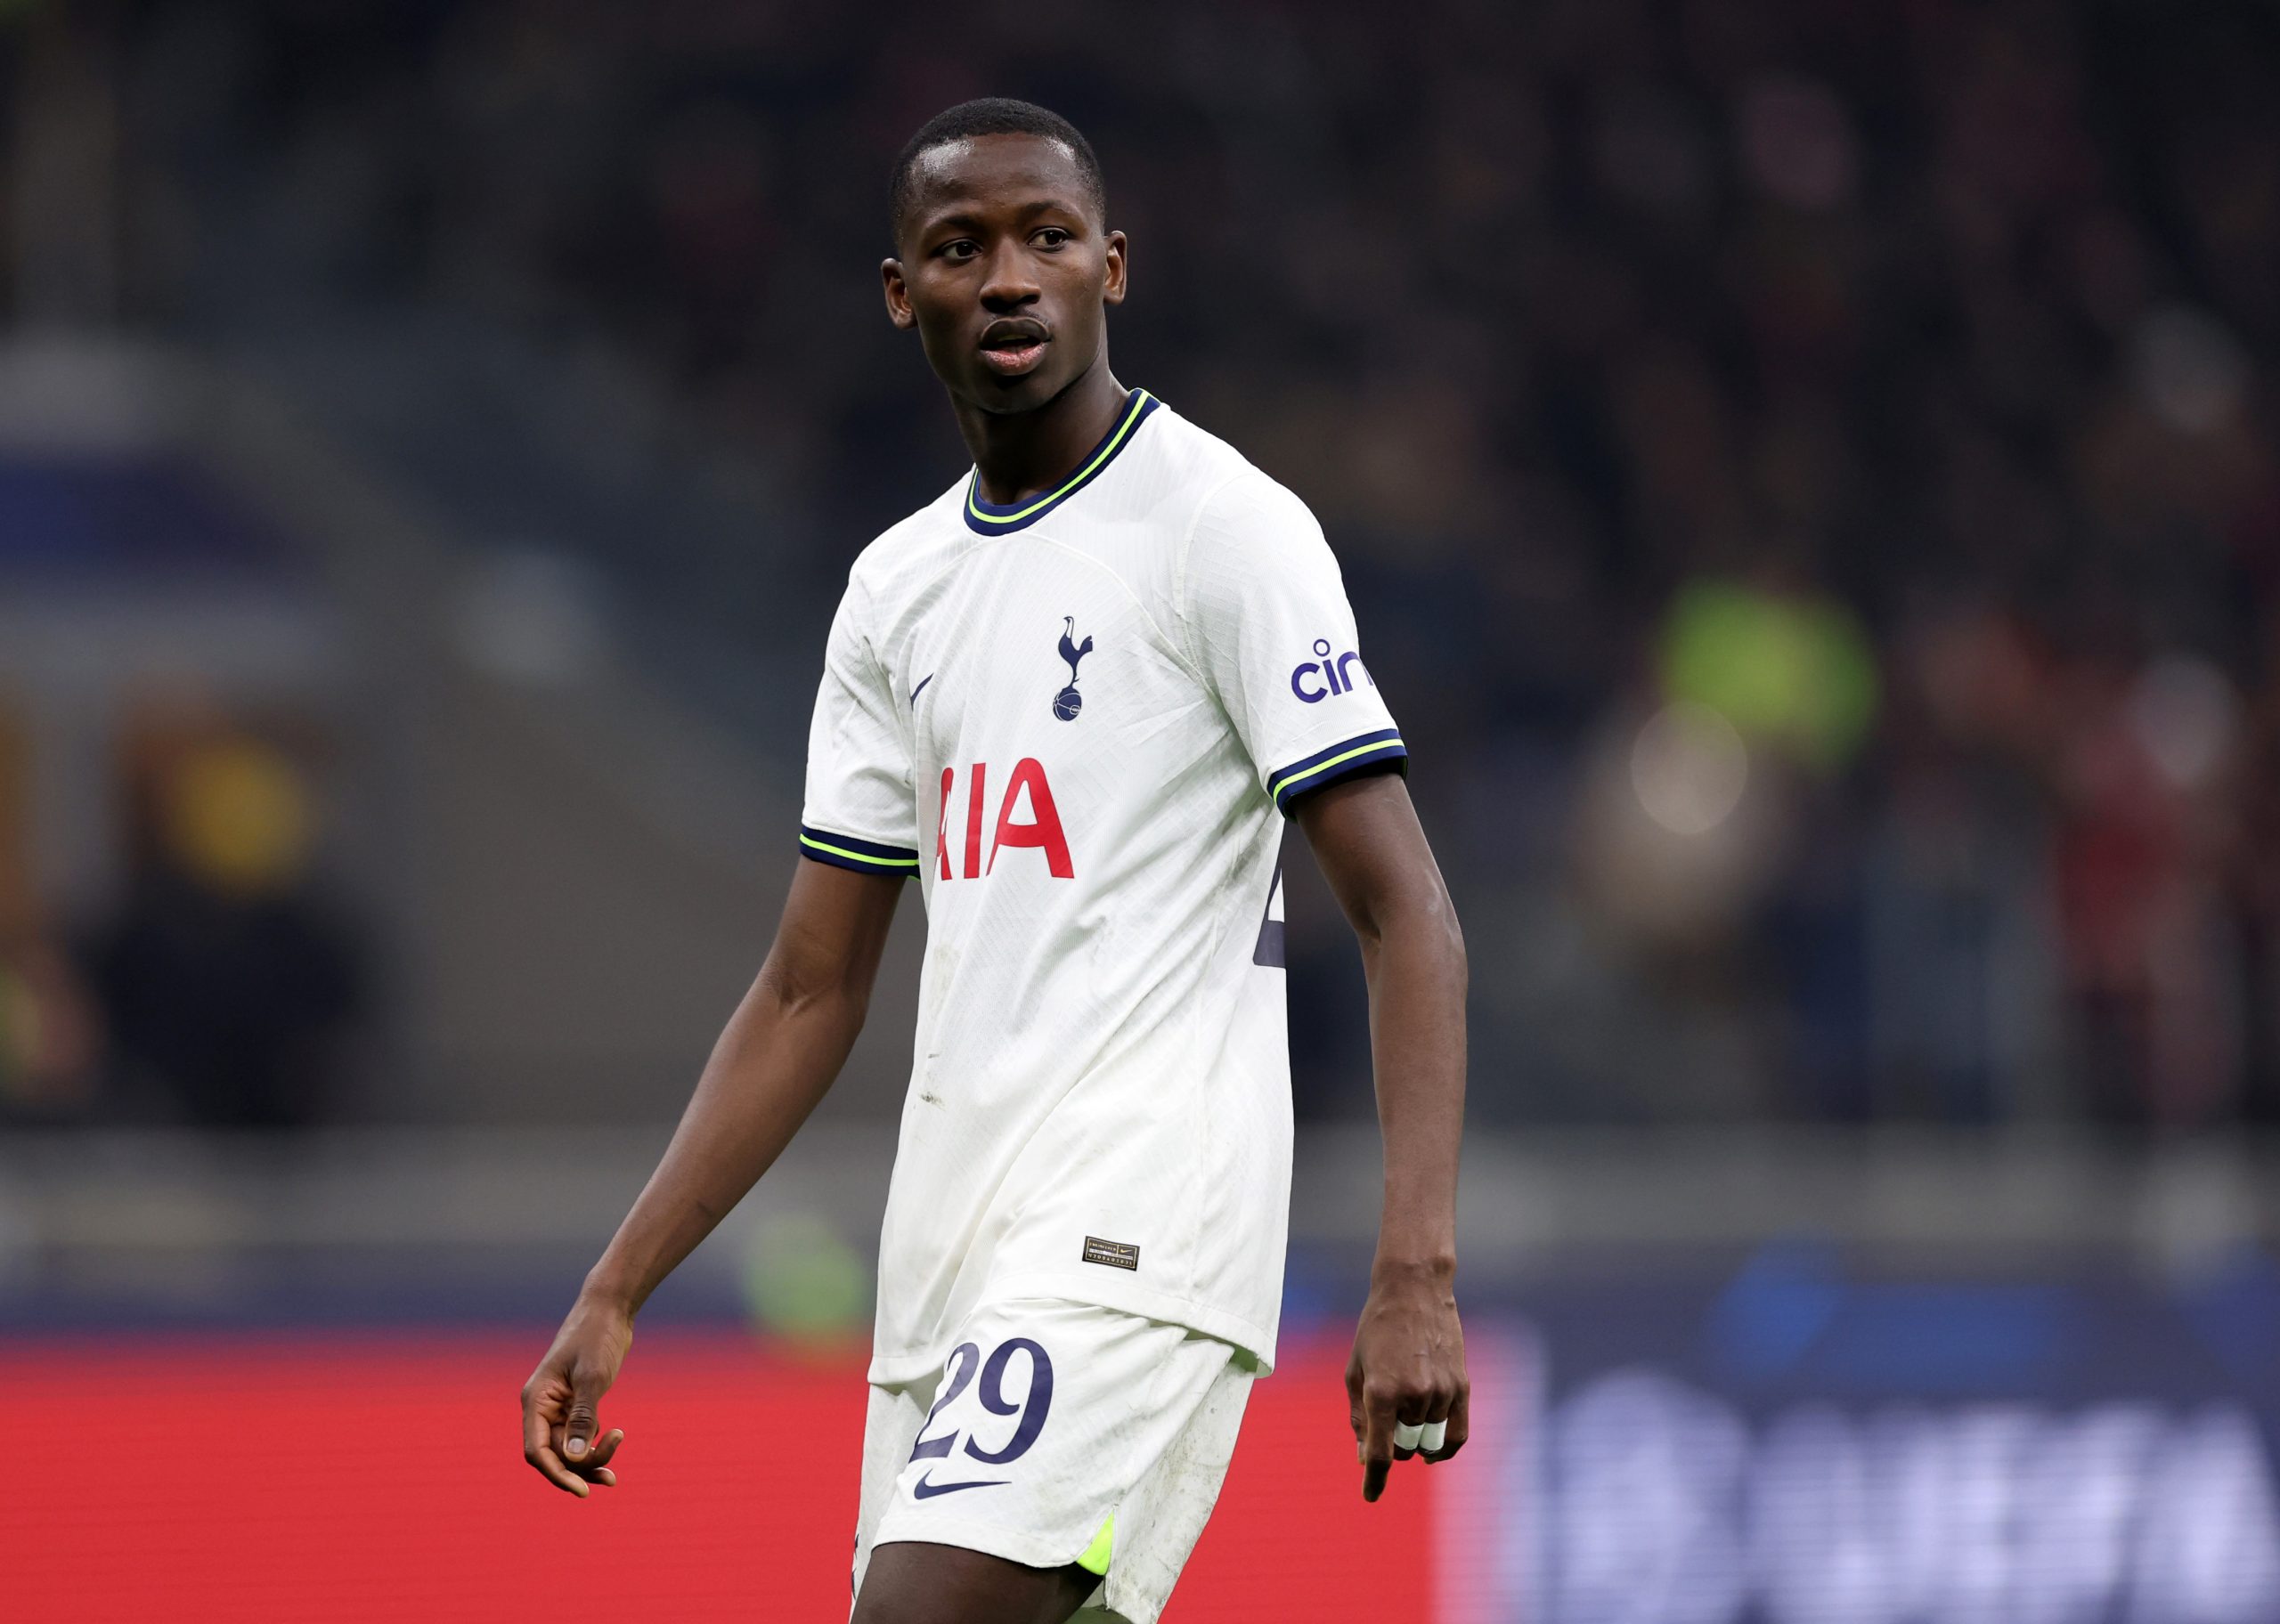 Tottenham captain Son Heung-min was elated with Pape Matar Sarr signing a new long-term contract